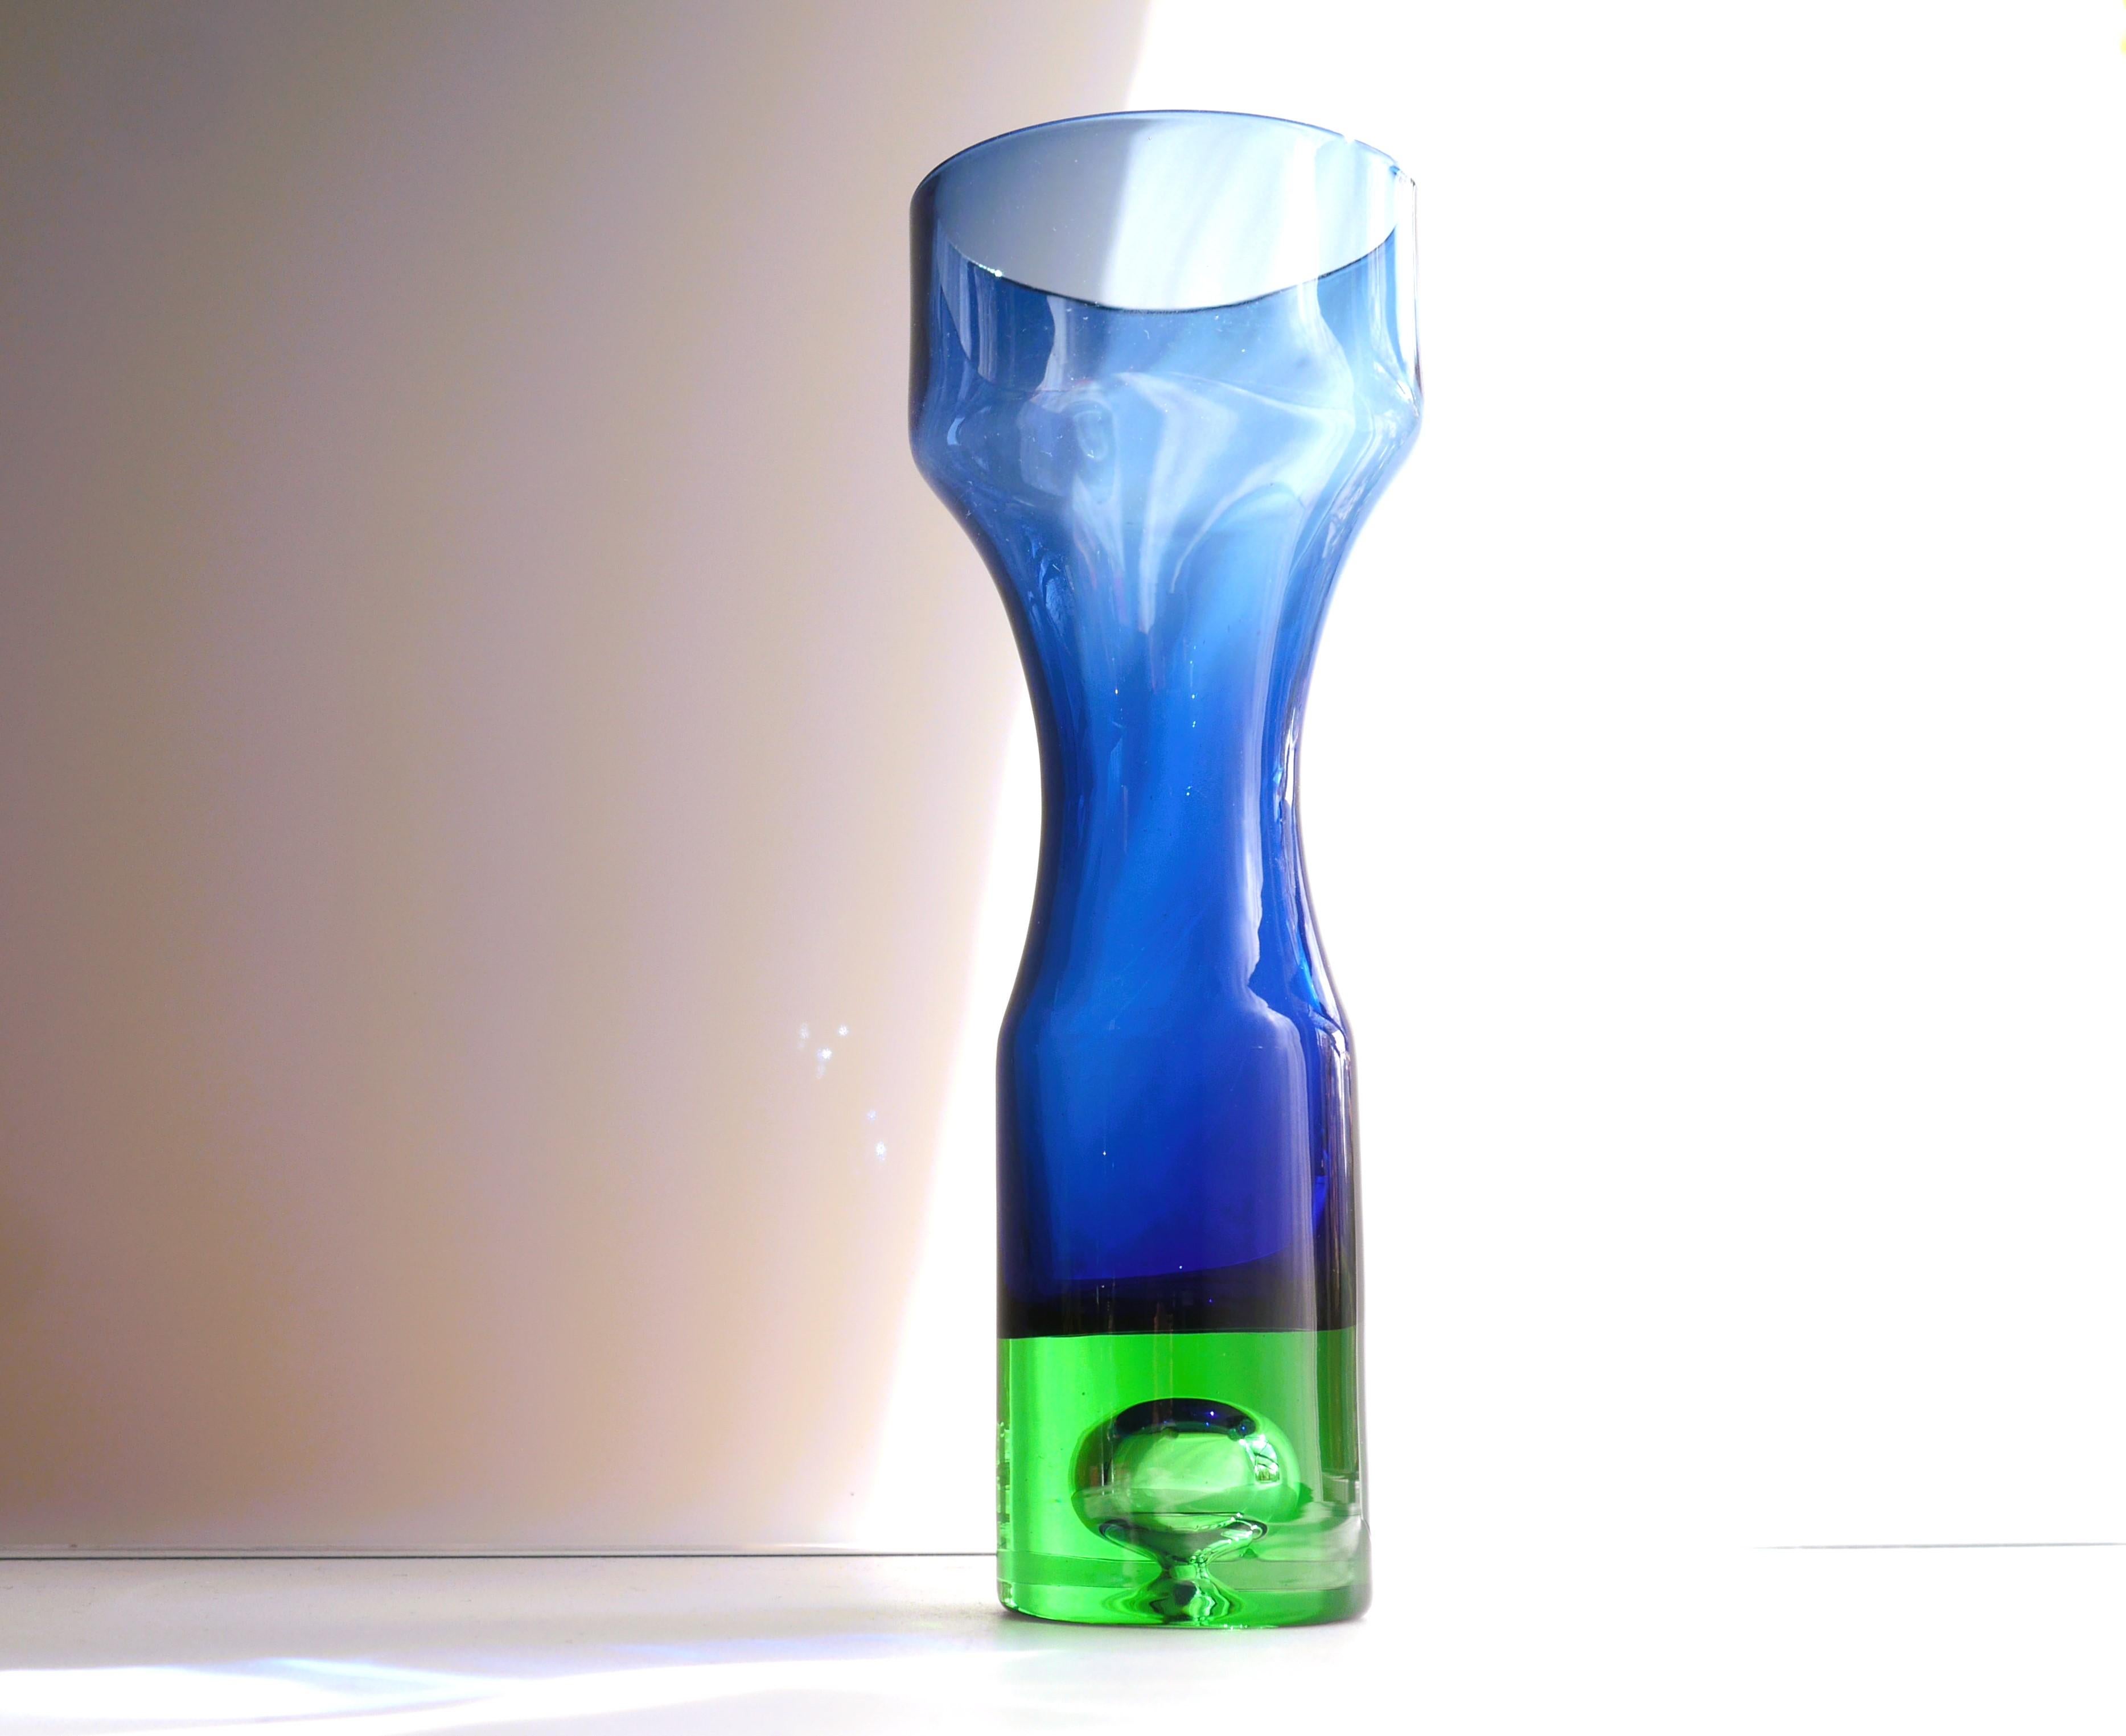 A striking glass vase in blue and green by Bo Borgström for Åseda Glass works, Sweden. This is very much a statement glass piece. The vase has a nice shape strong colours in two layers the top has a strong kingfisher blue colour and the bottom part